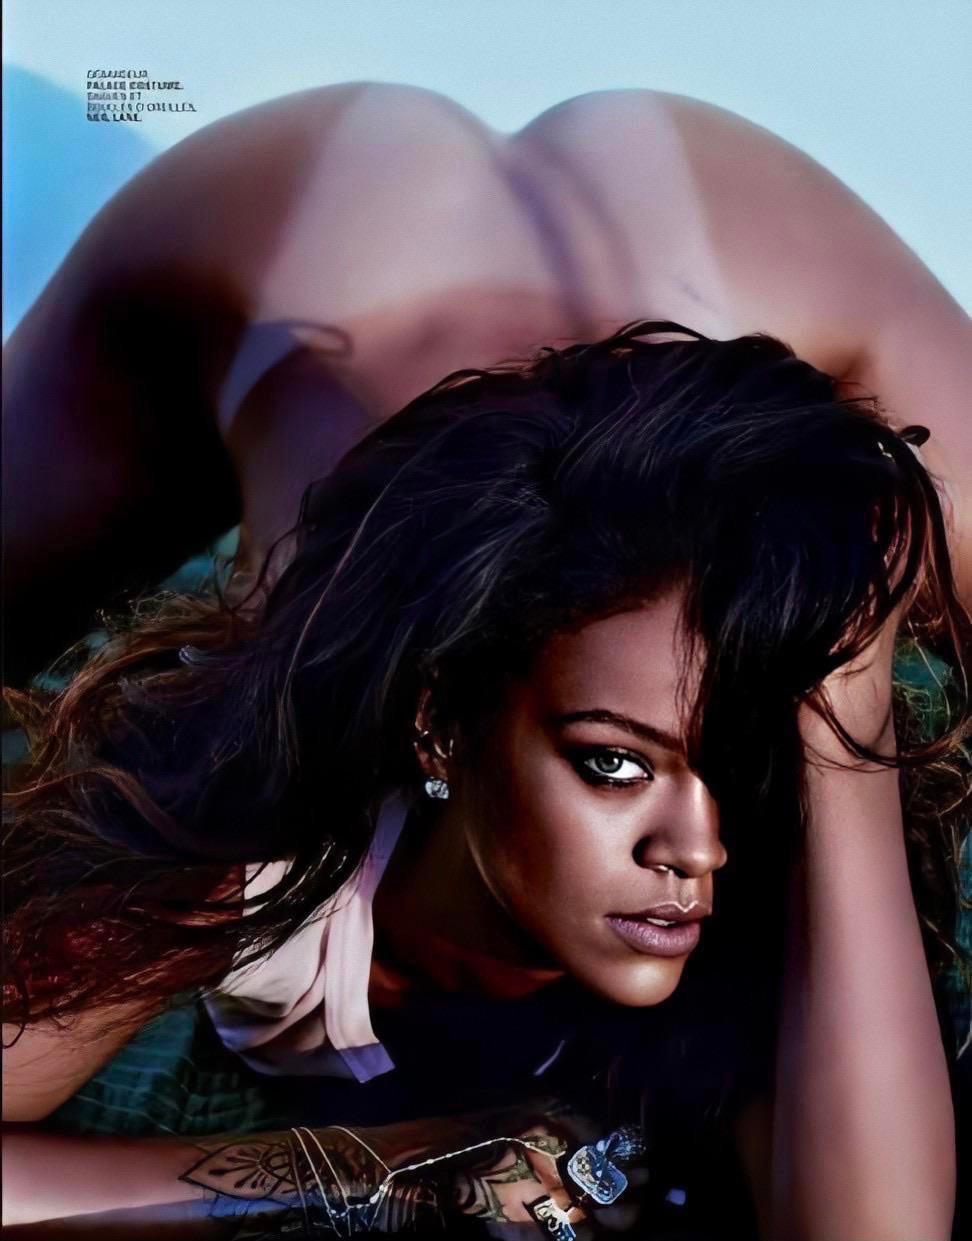 My horny dad wants to fuck Rihanna with his huge old cock